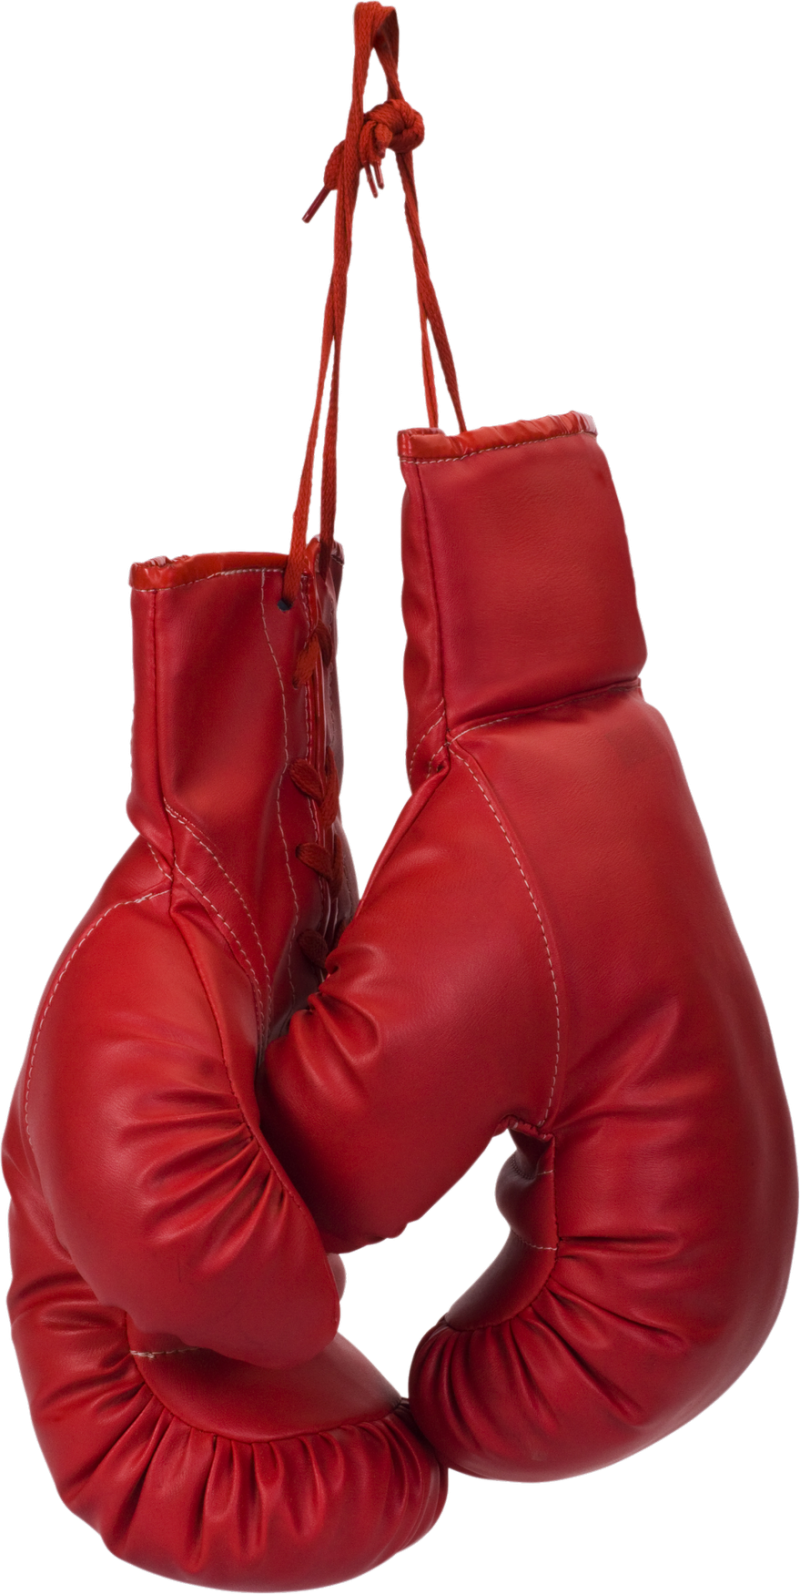 Boxing Glove Png Image Purepng Free Transparent Cc0 Png Image Library ...